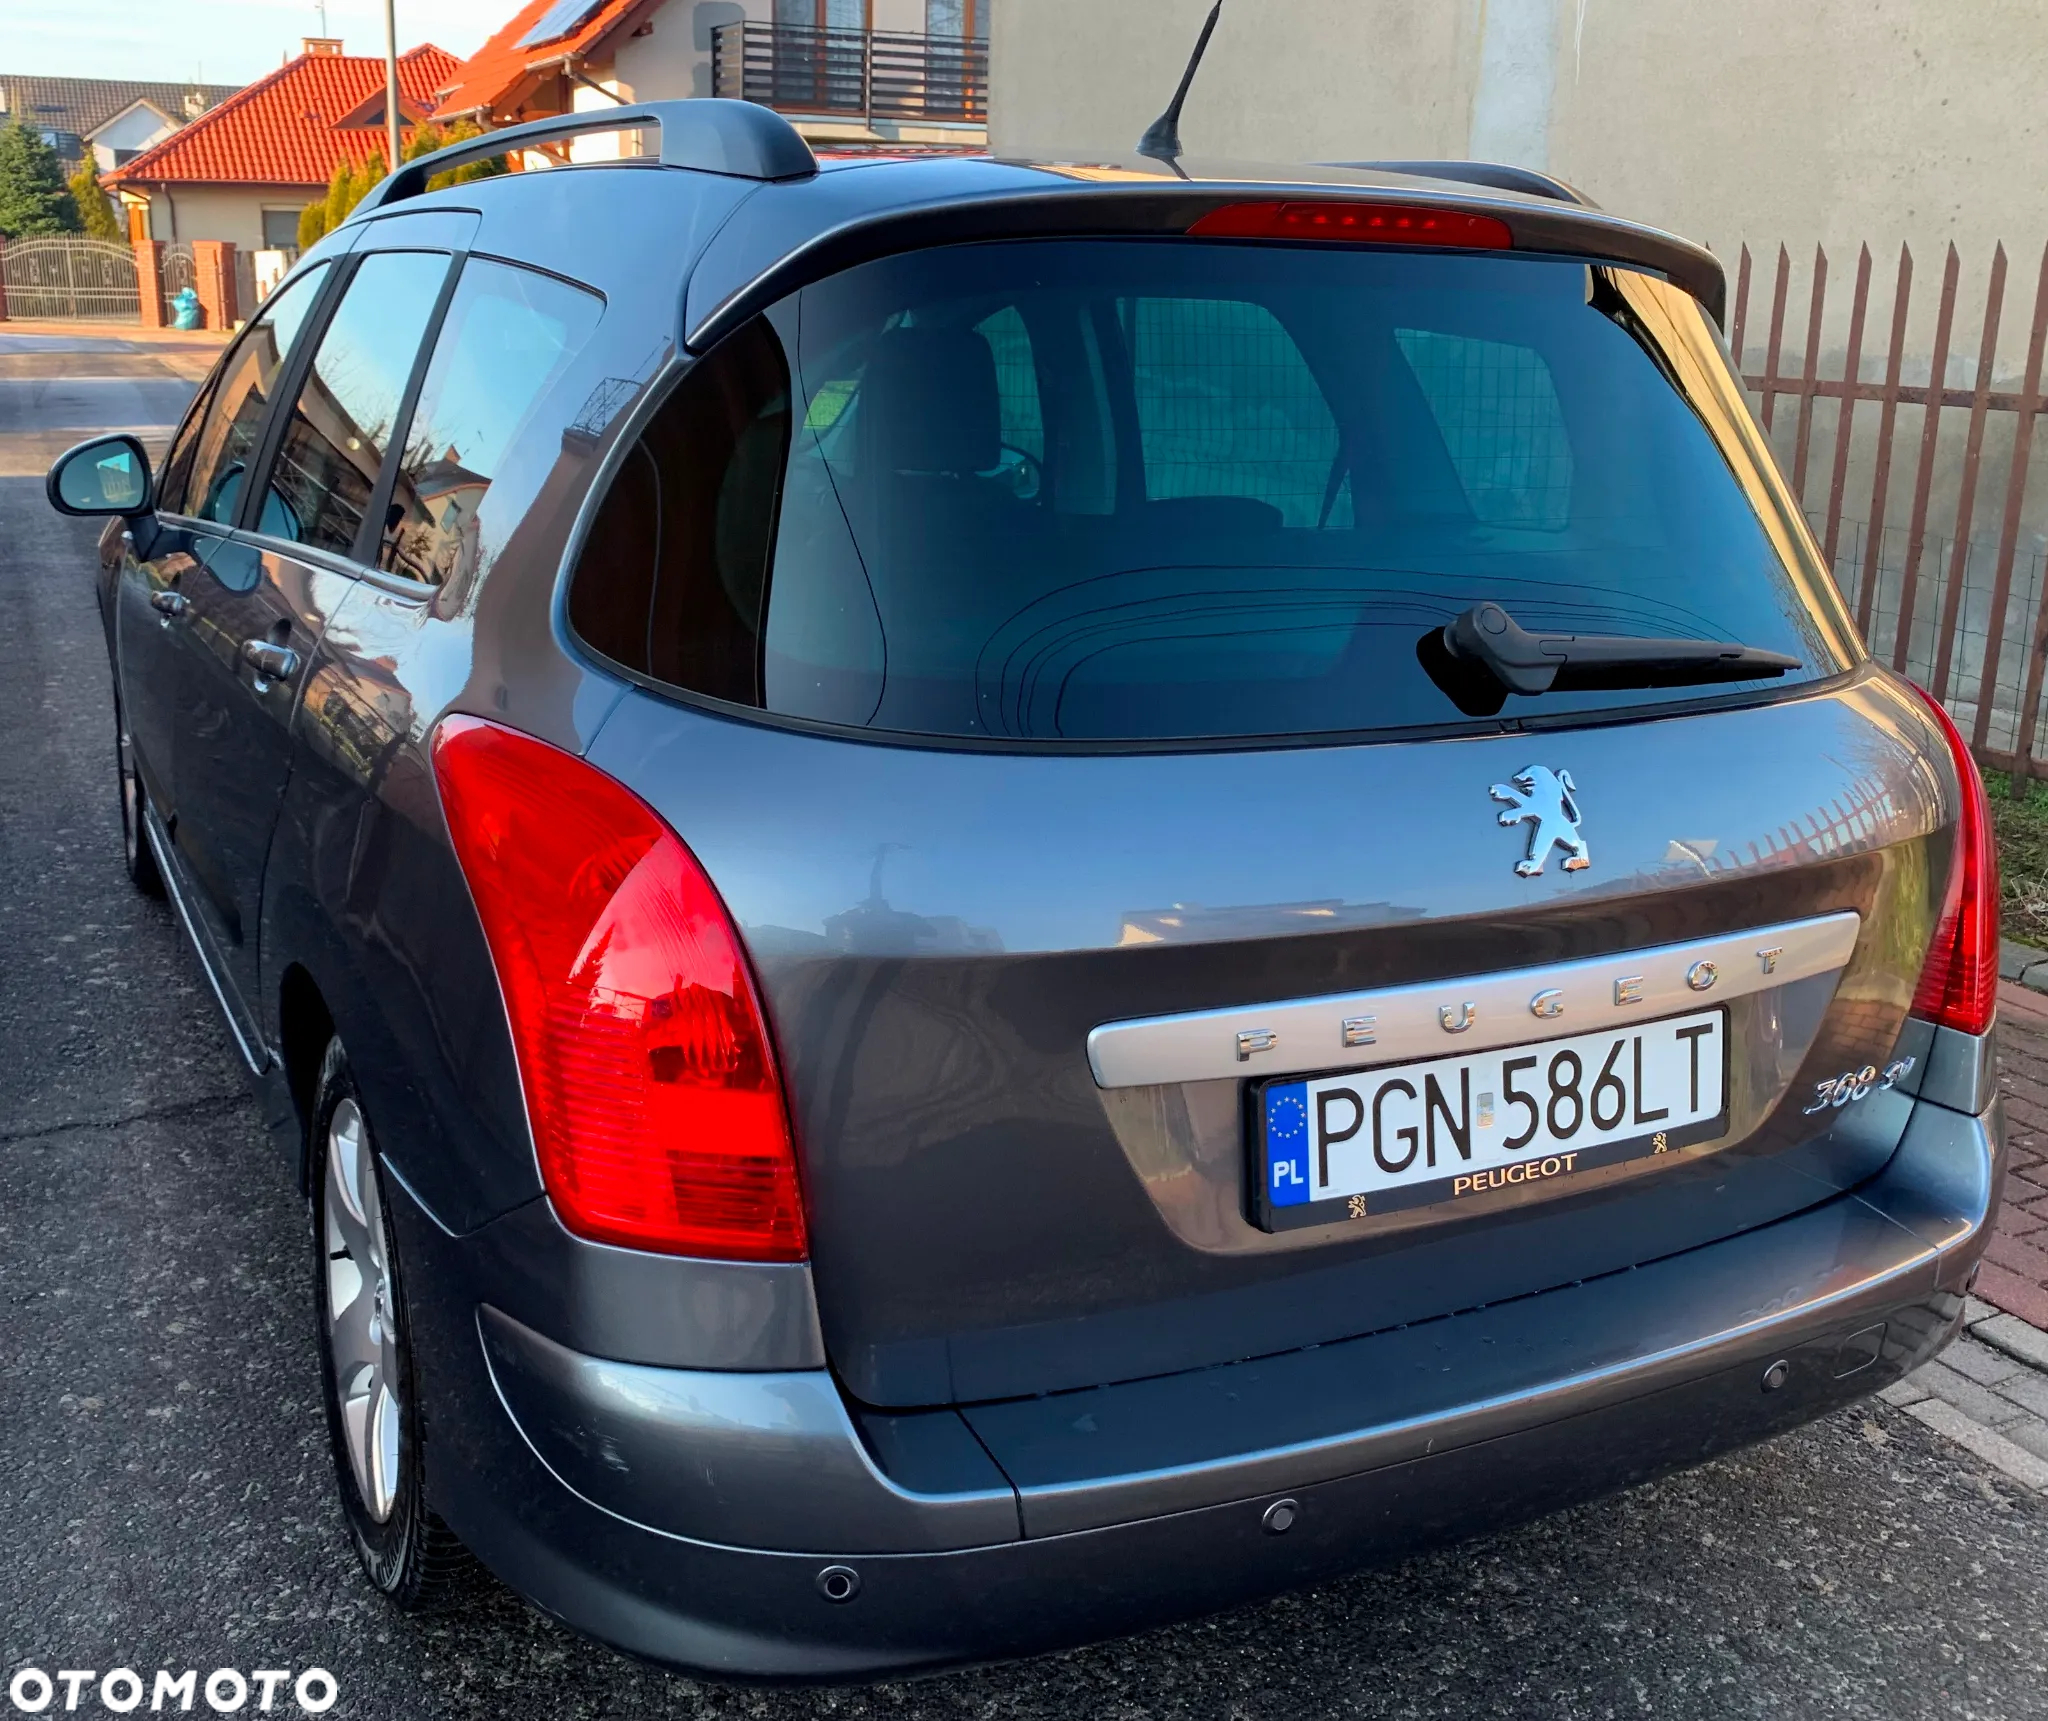 Peugeot 308 1.6 HDi Active - 32